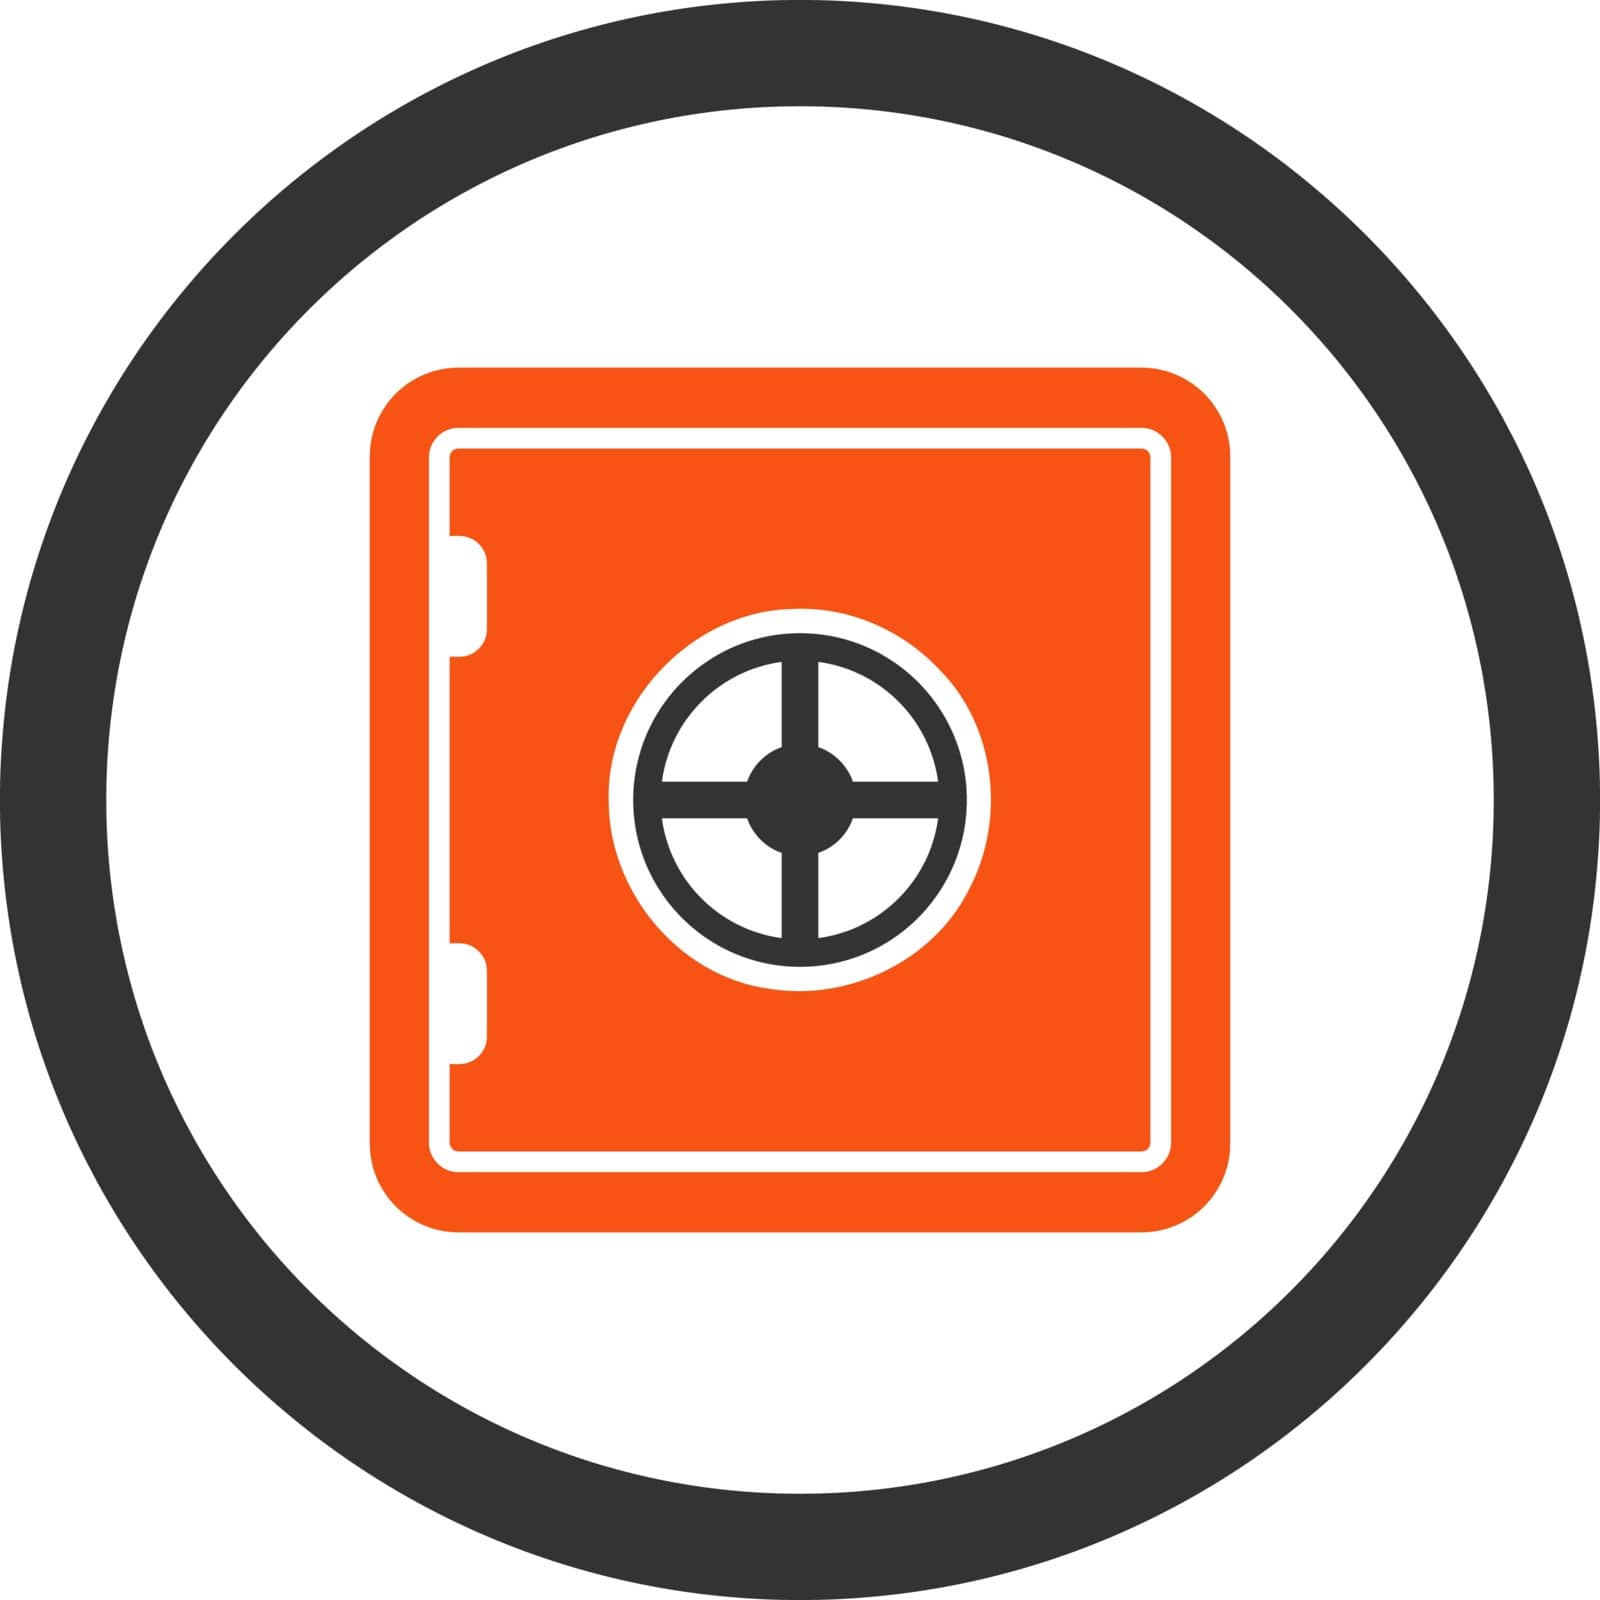 Safe vector icon. This flat rounded symbol uses orange and gray colors and isolated on a white background.